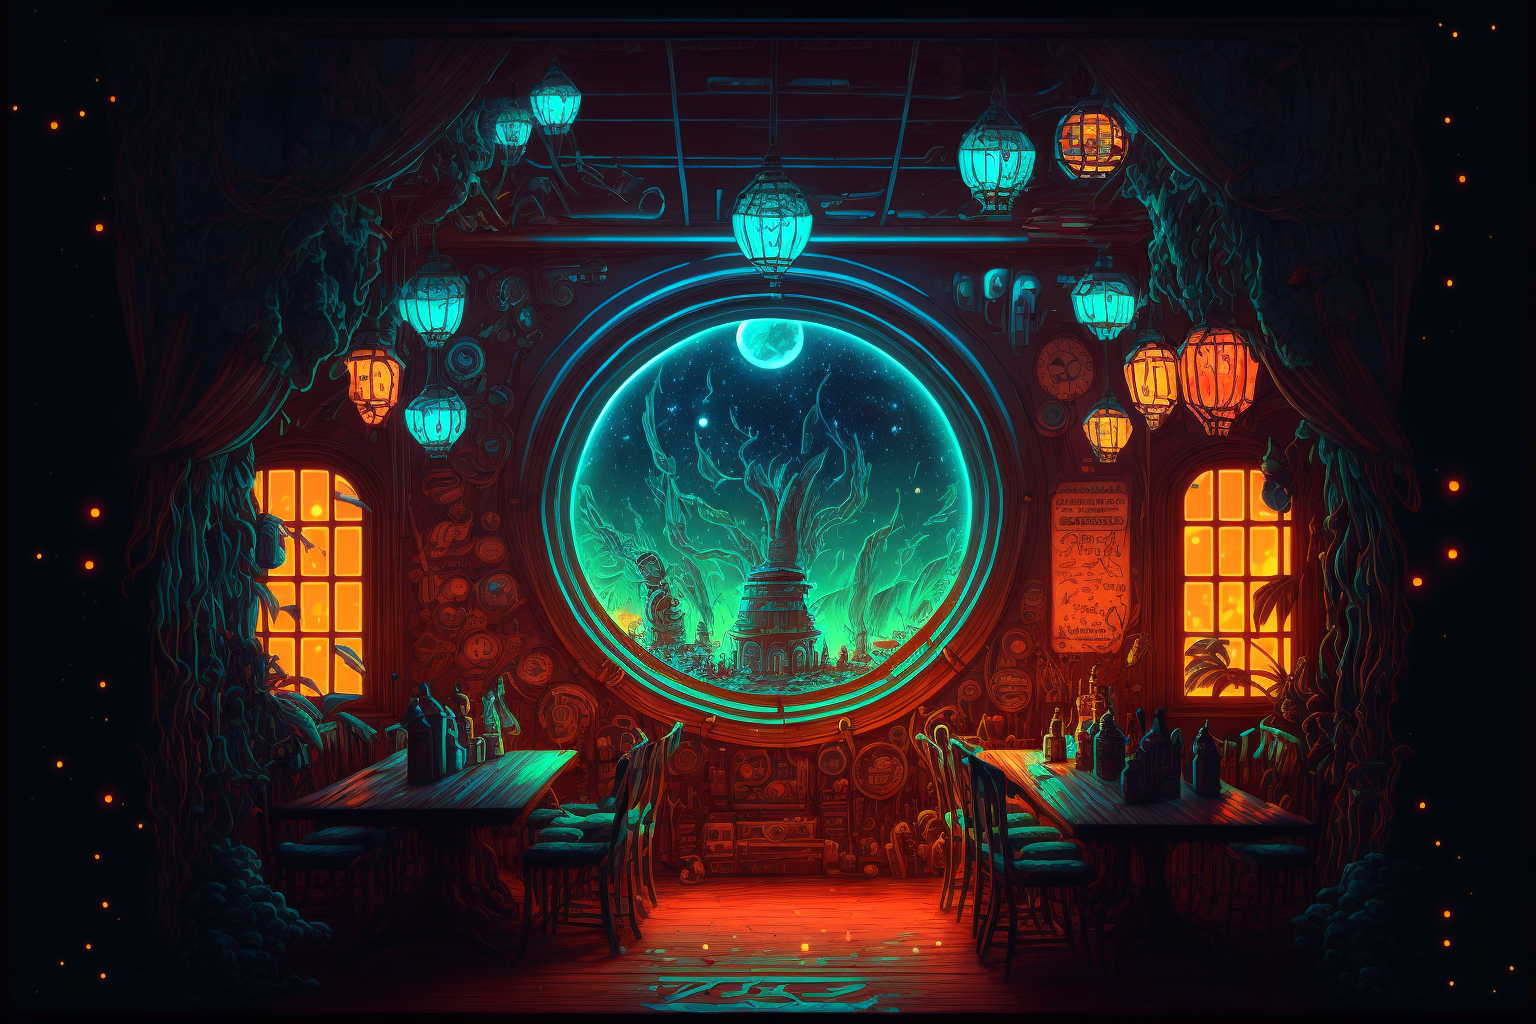 MadDoginSF_inside_a_massive_western_saloon_in_outer_space_lante_be5b4f5d-cd59-43c4-831c-15d761fc4689.png